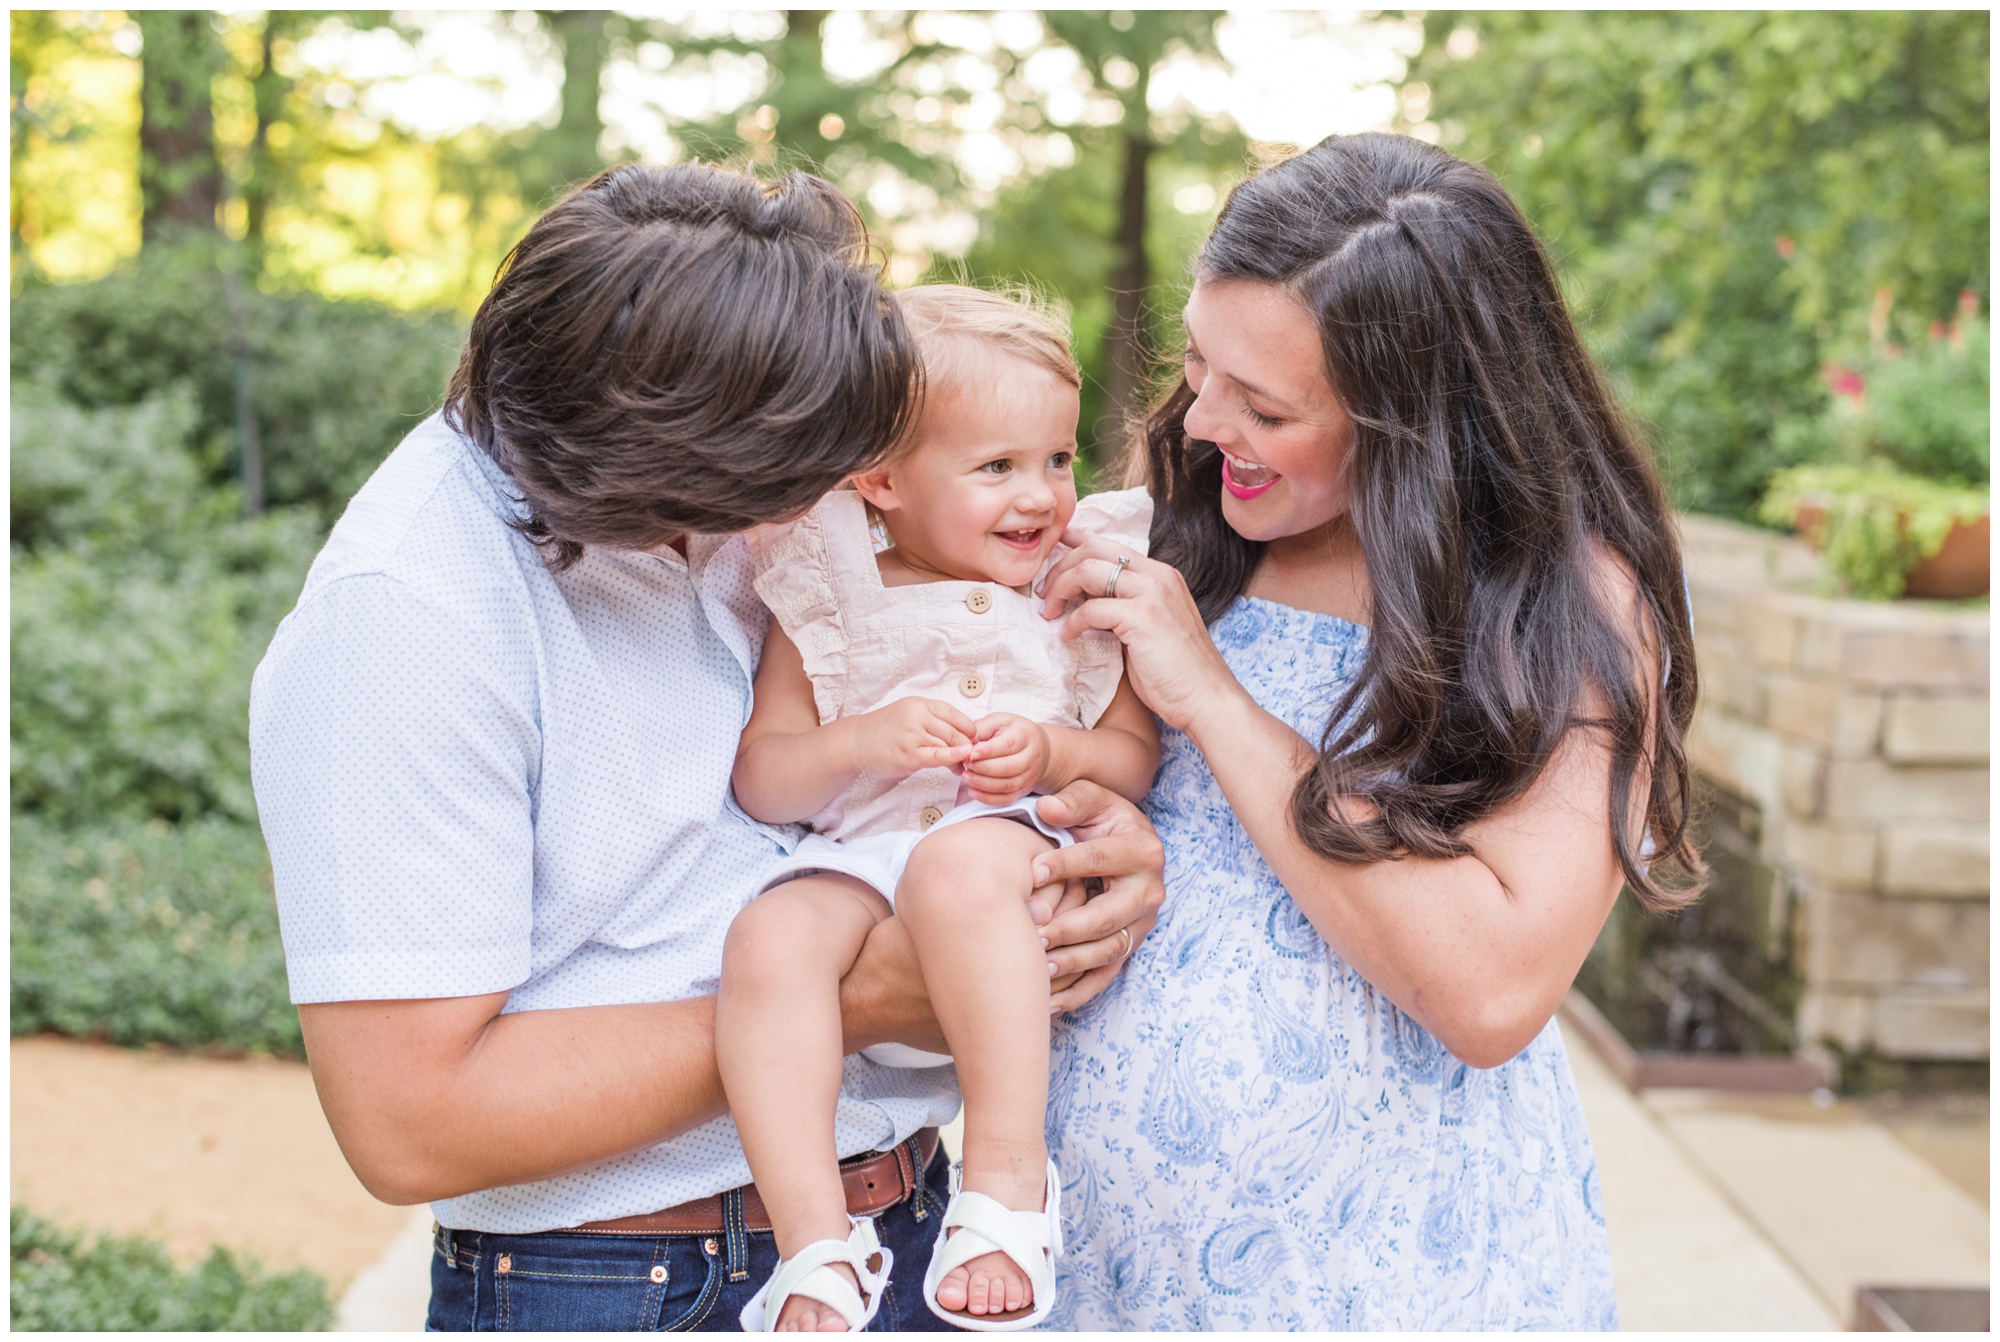 Fort Worth Family Photographer | Fort Worth Destination Photographer | Fort Worth Maternity Session | Oklahoma City | Oklahoma City Photographer | Lauren Grimes Photography